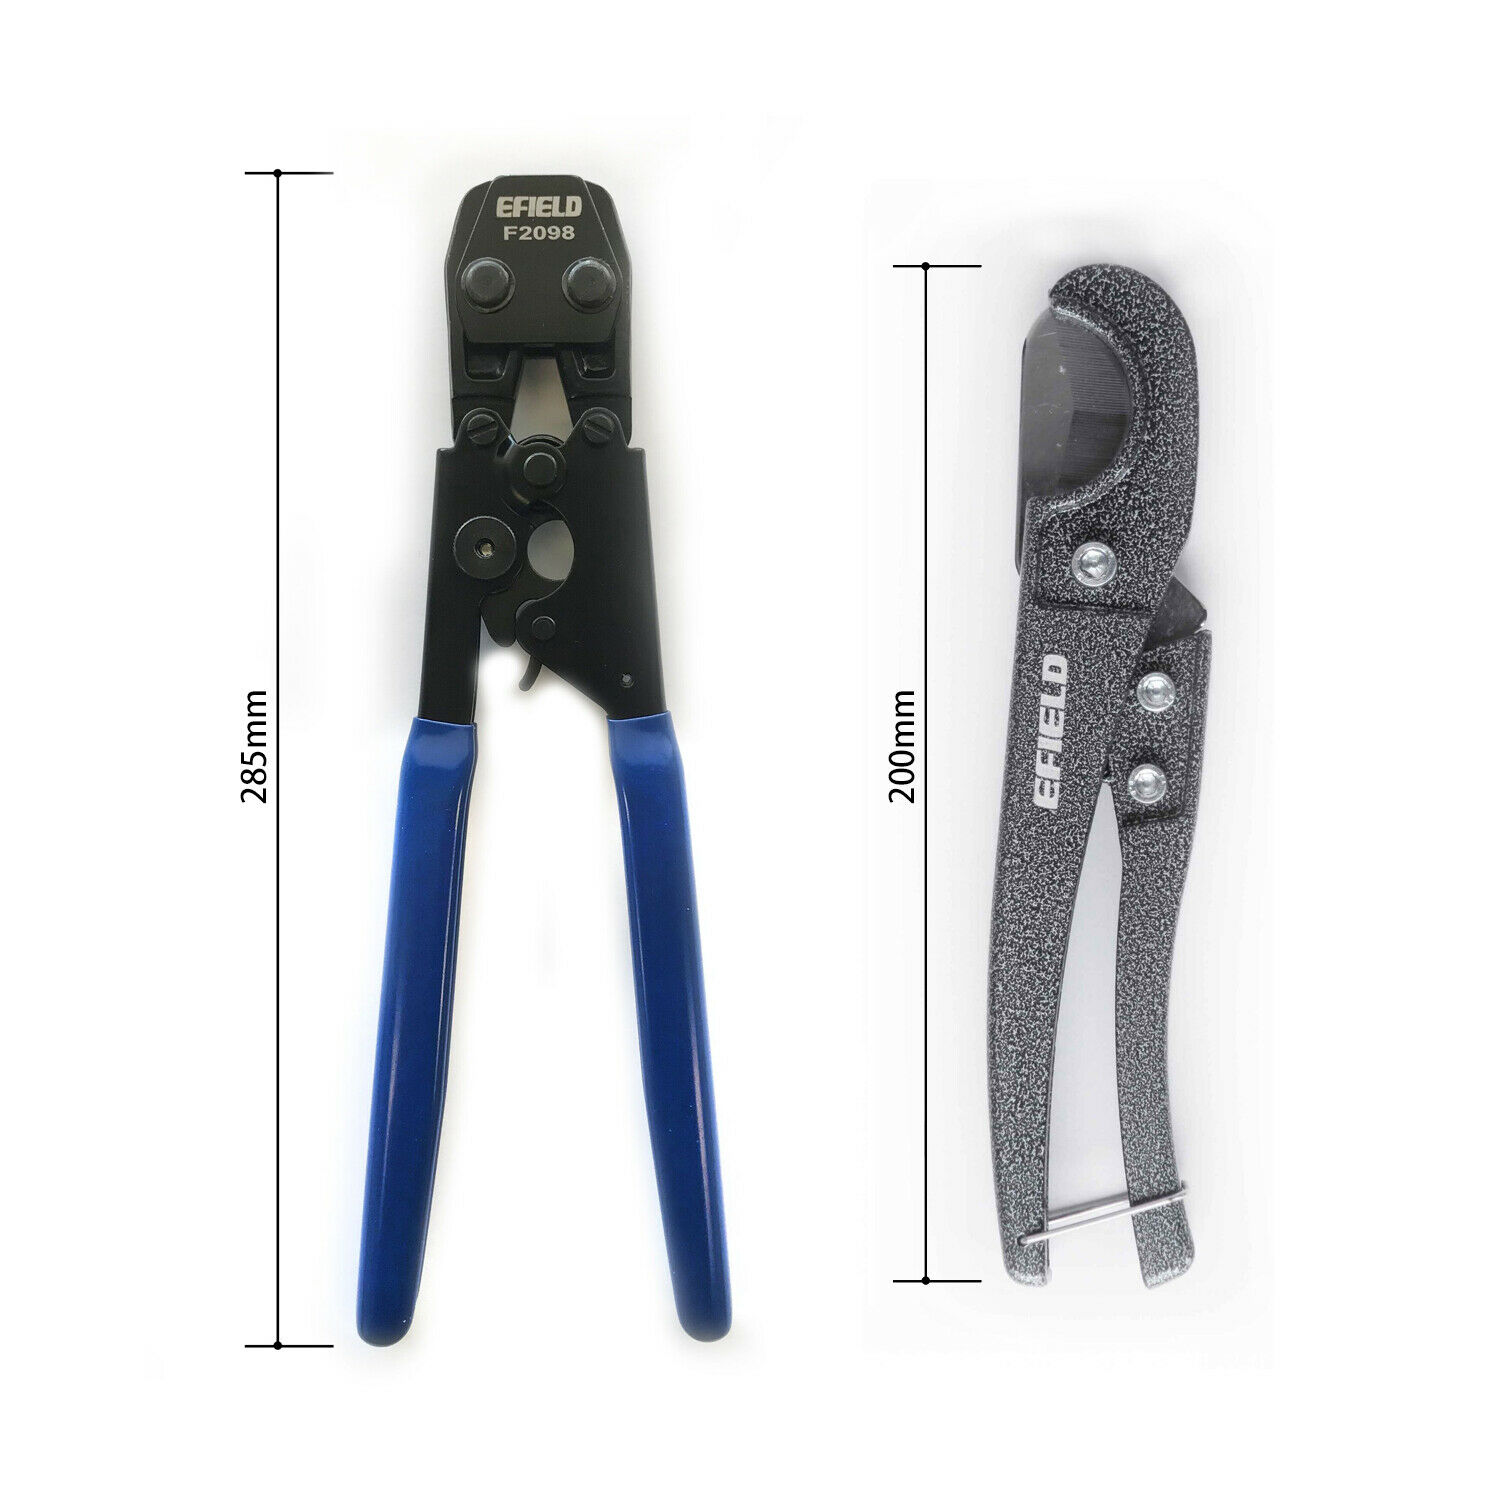 Pex Cinch Crimping Tool &go/no-go Gauge For Ss Clamps Sizes With Pipe Cutter